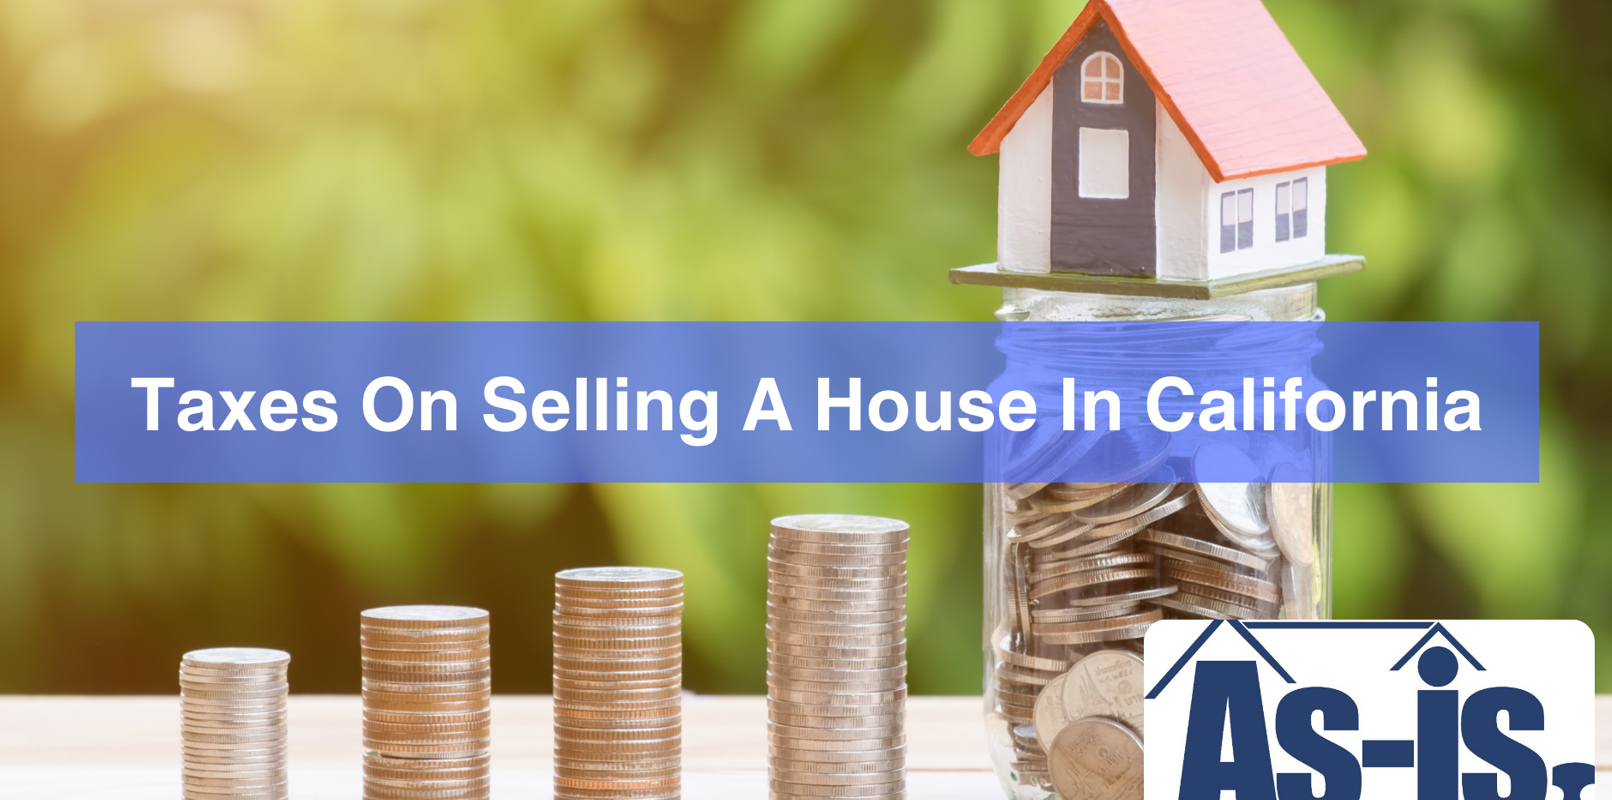 Taxes On Selling A House In California